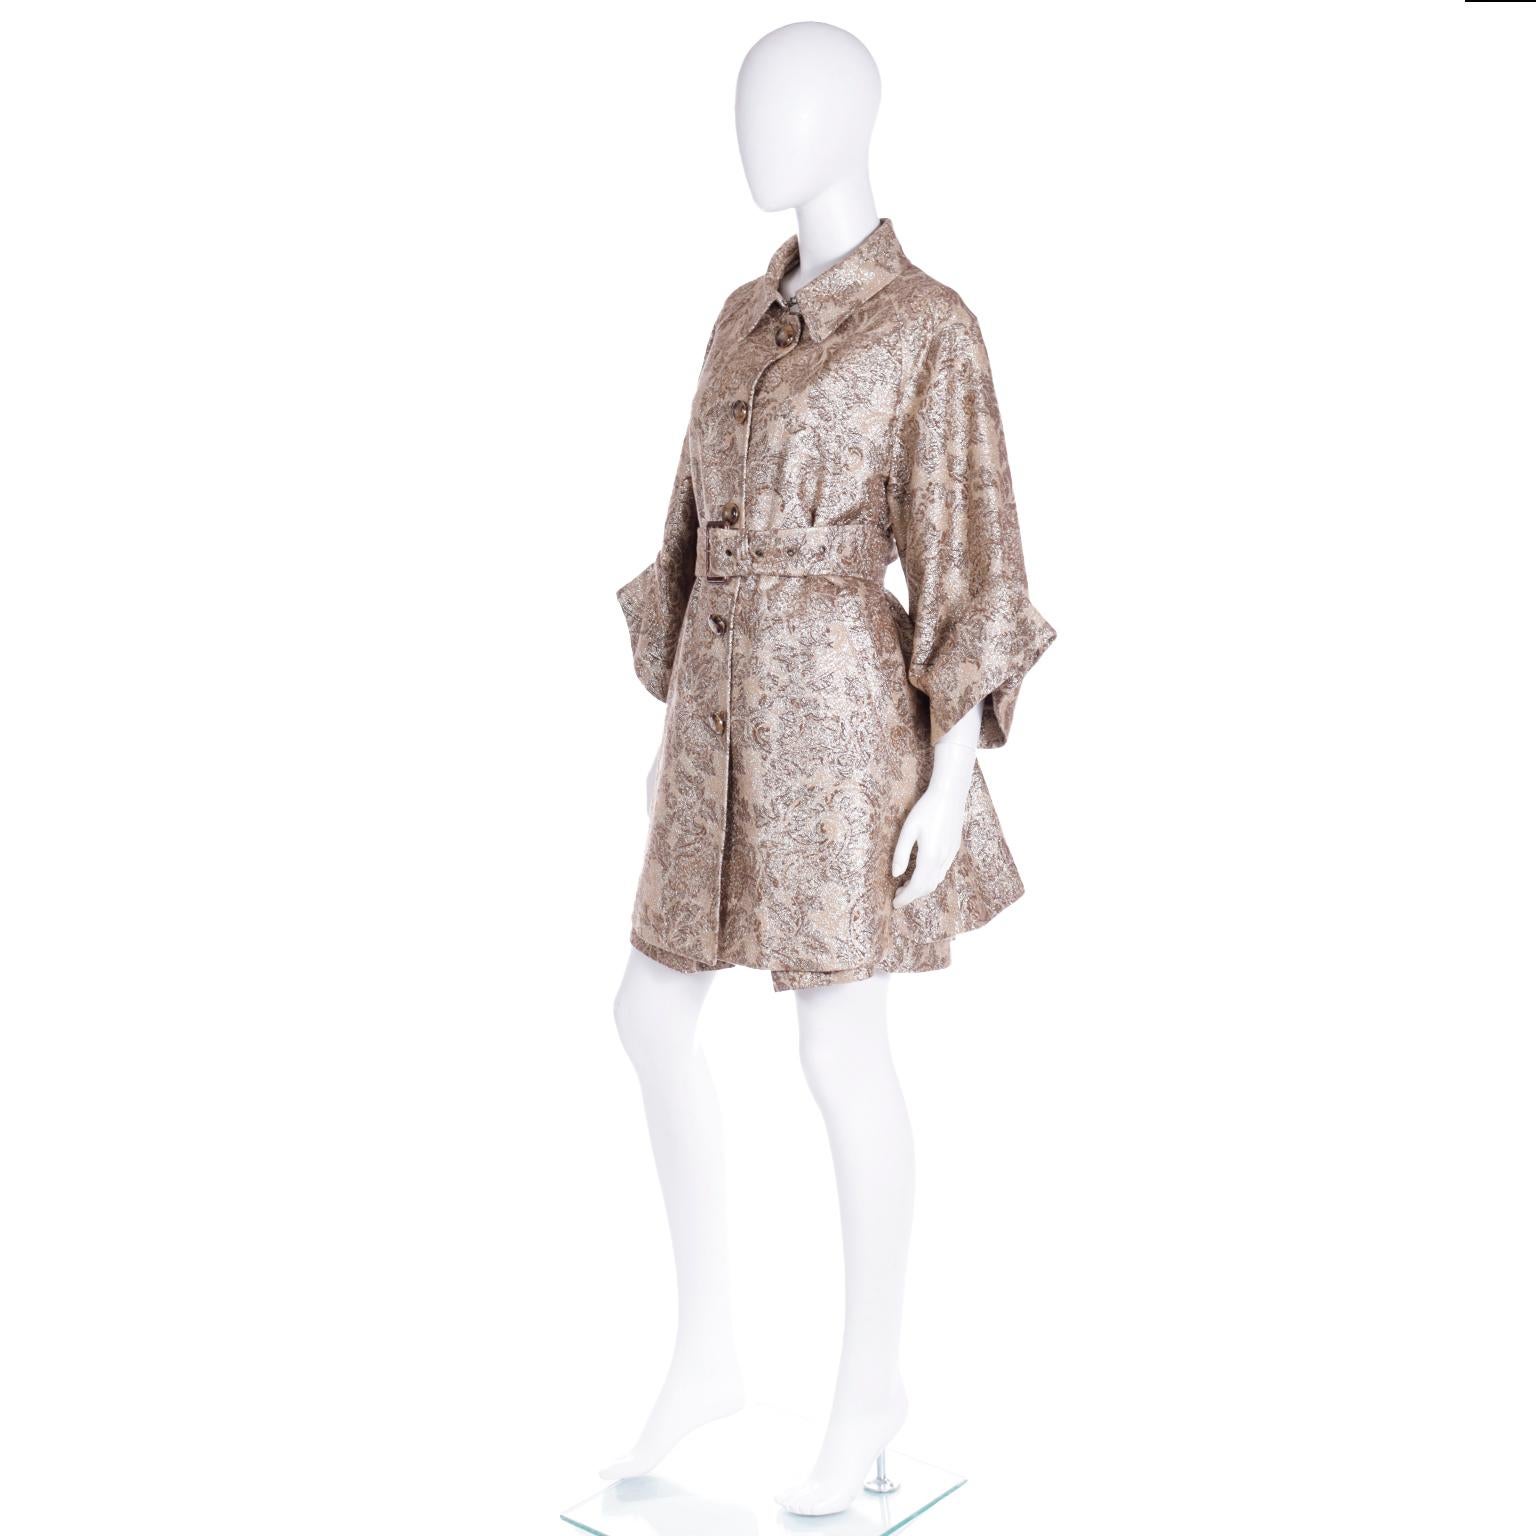 D&G Dolce & Gabbana Gold Floral Dress and Coat With Belt Amy Winehouse 2007 For Sale 4